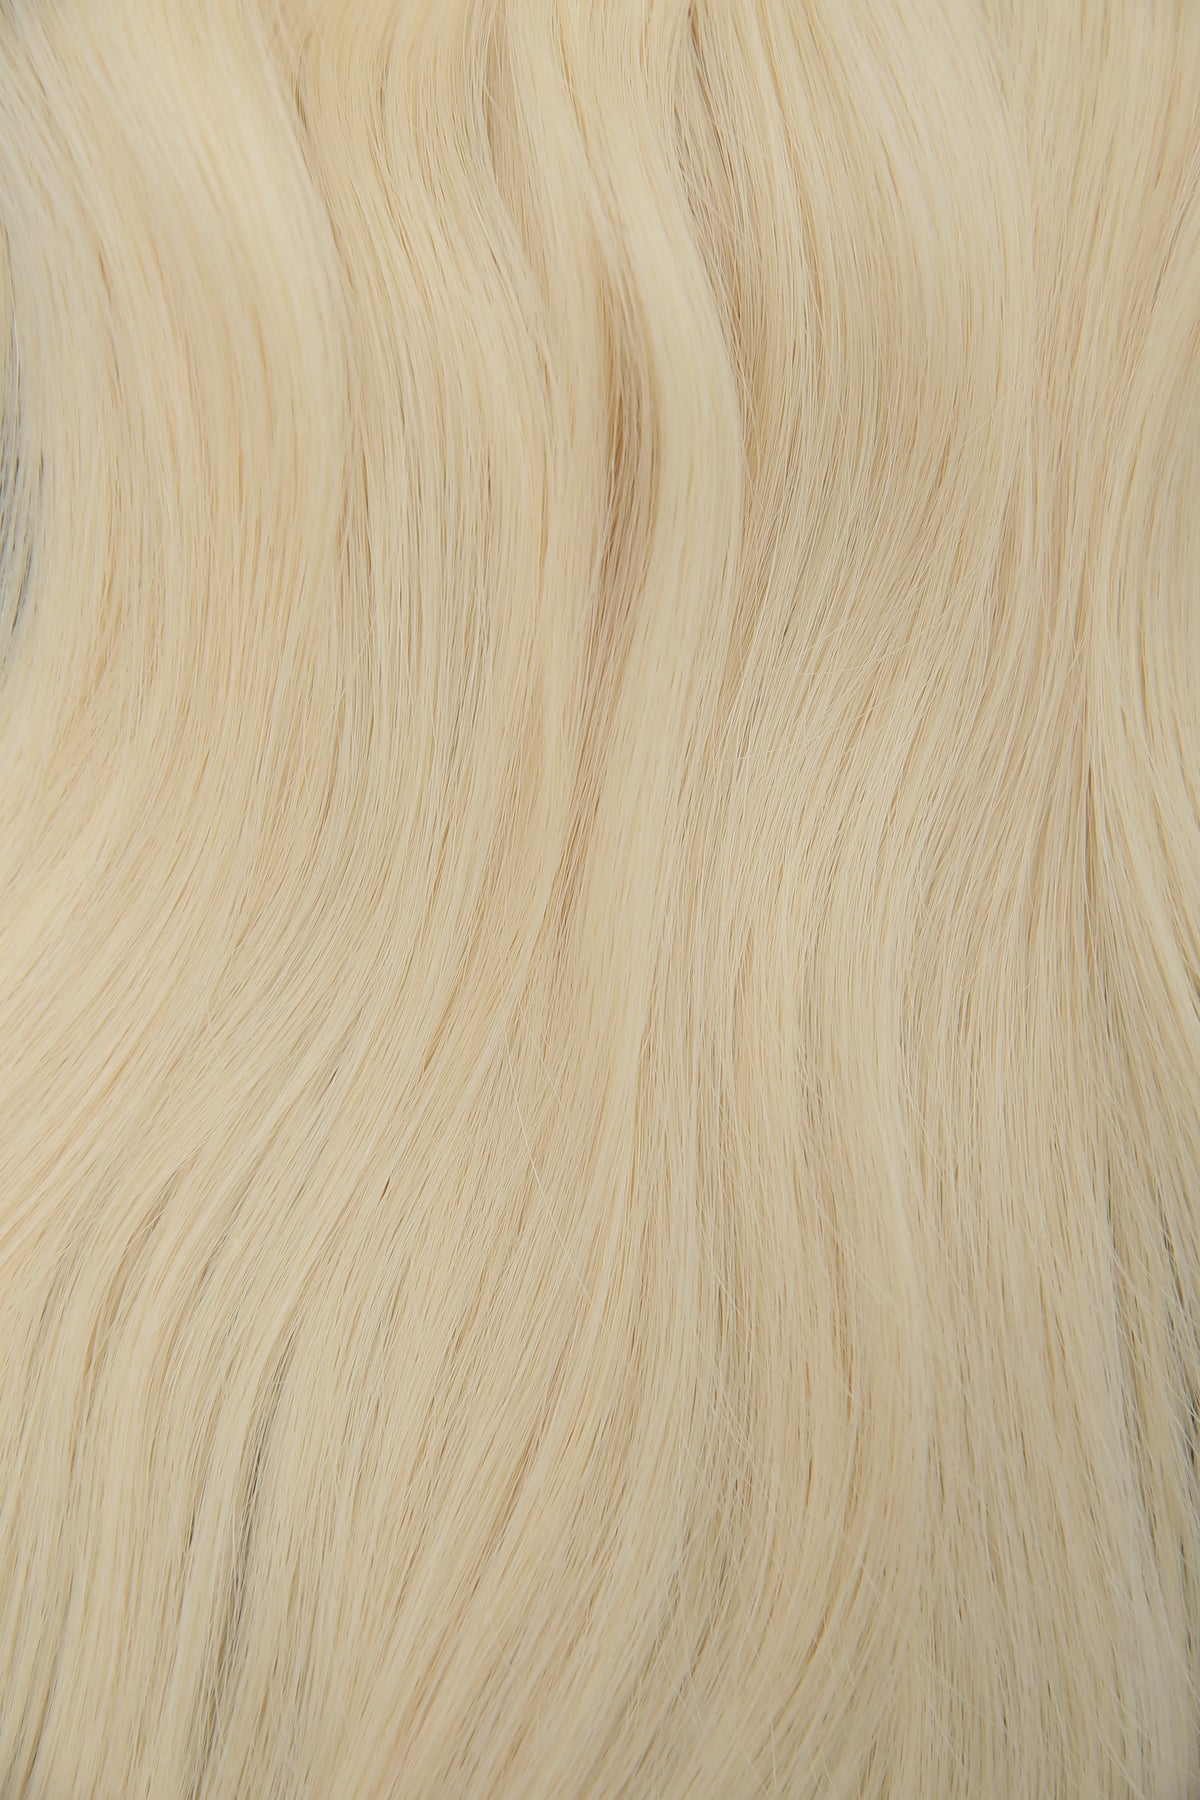 #613 Platinum Blonde Traditional Weft Extensions